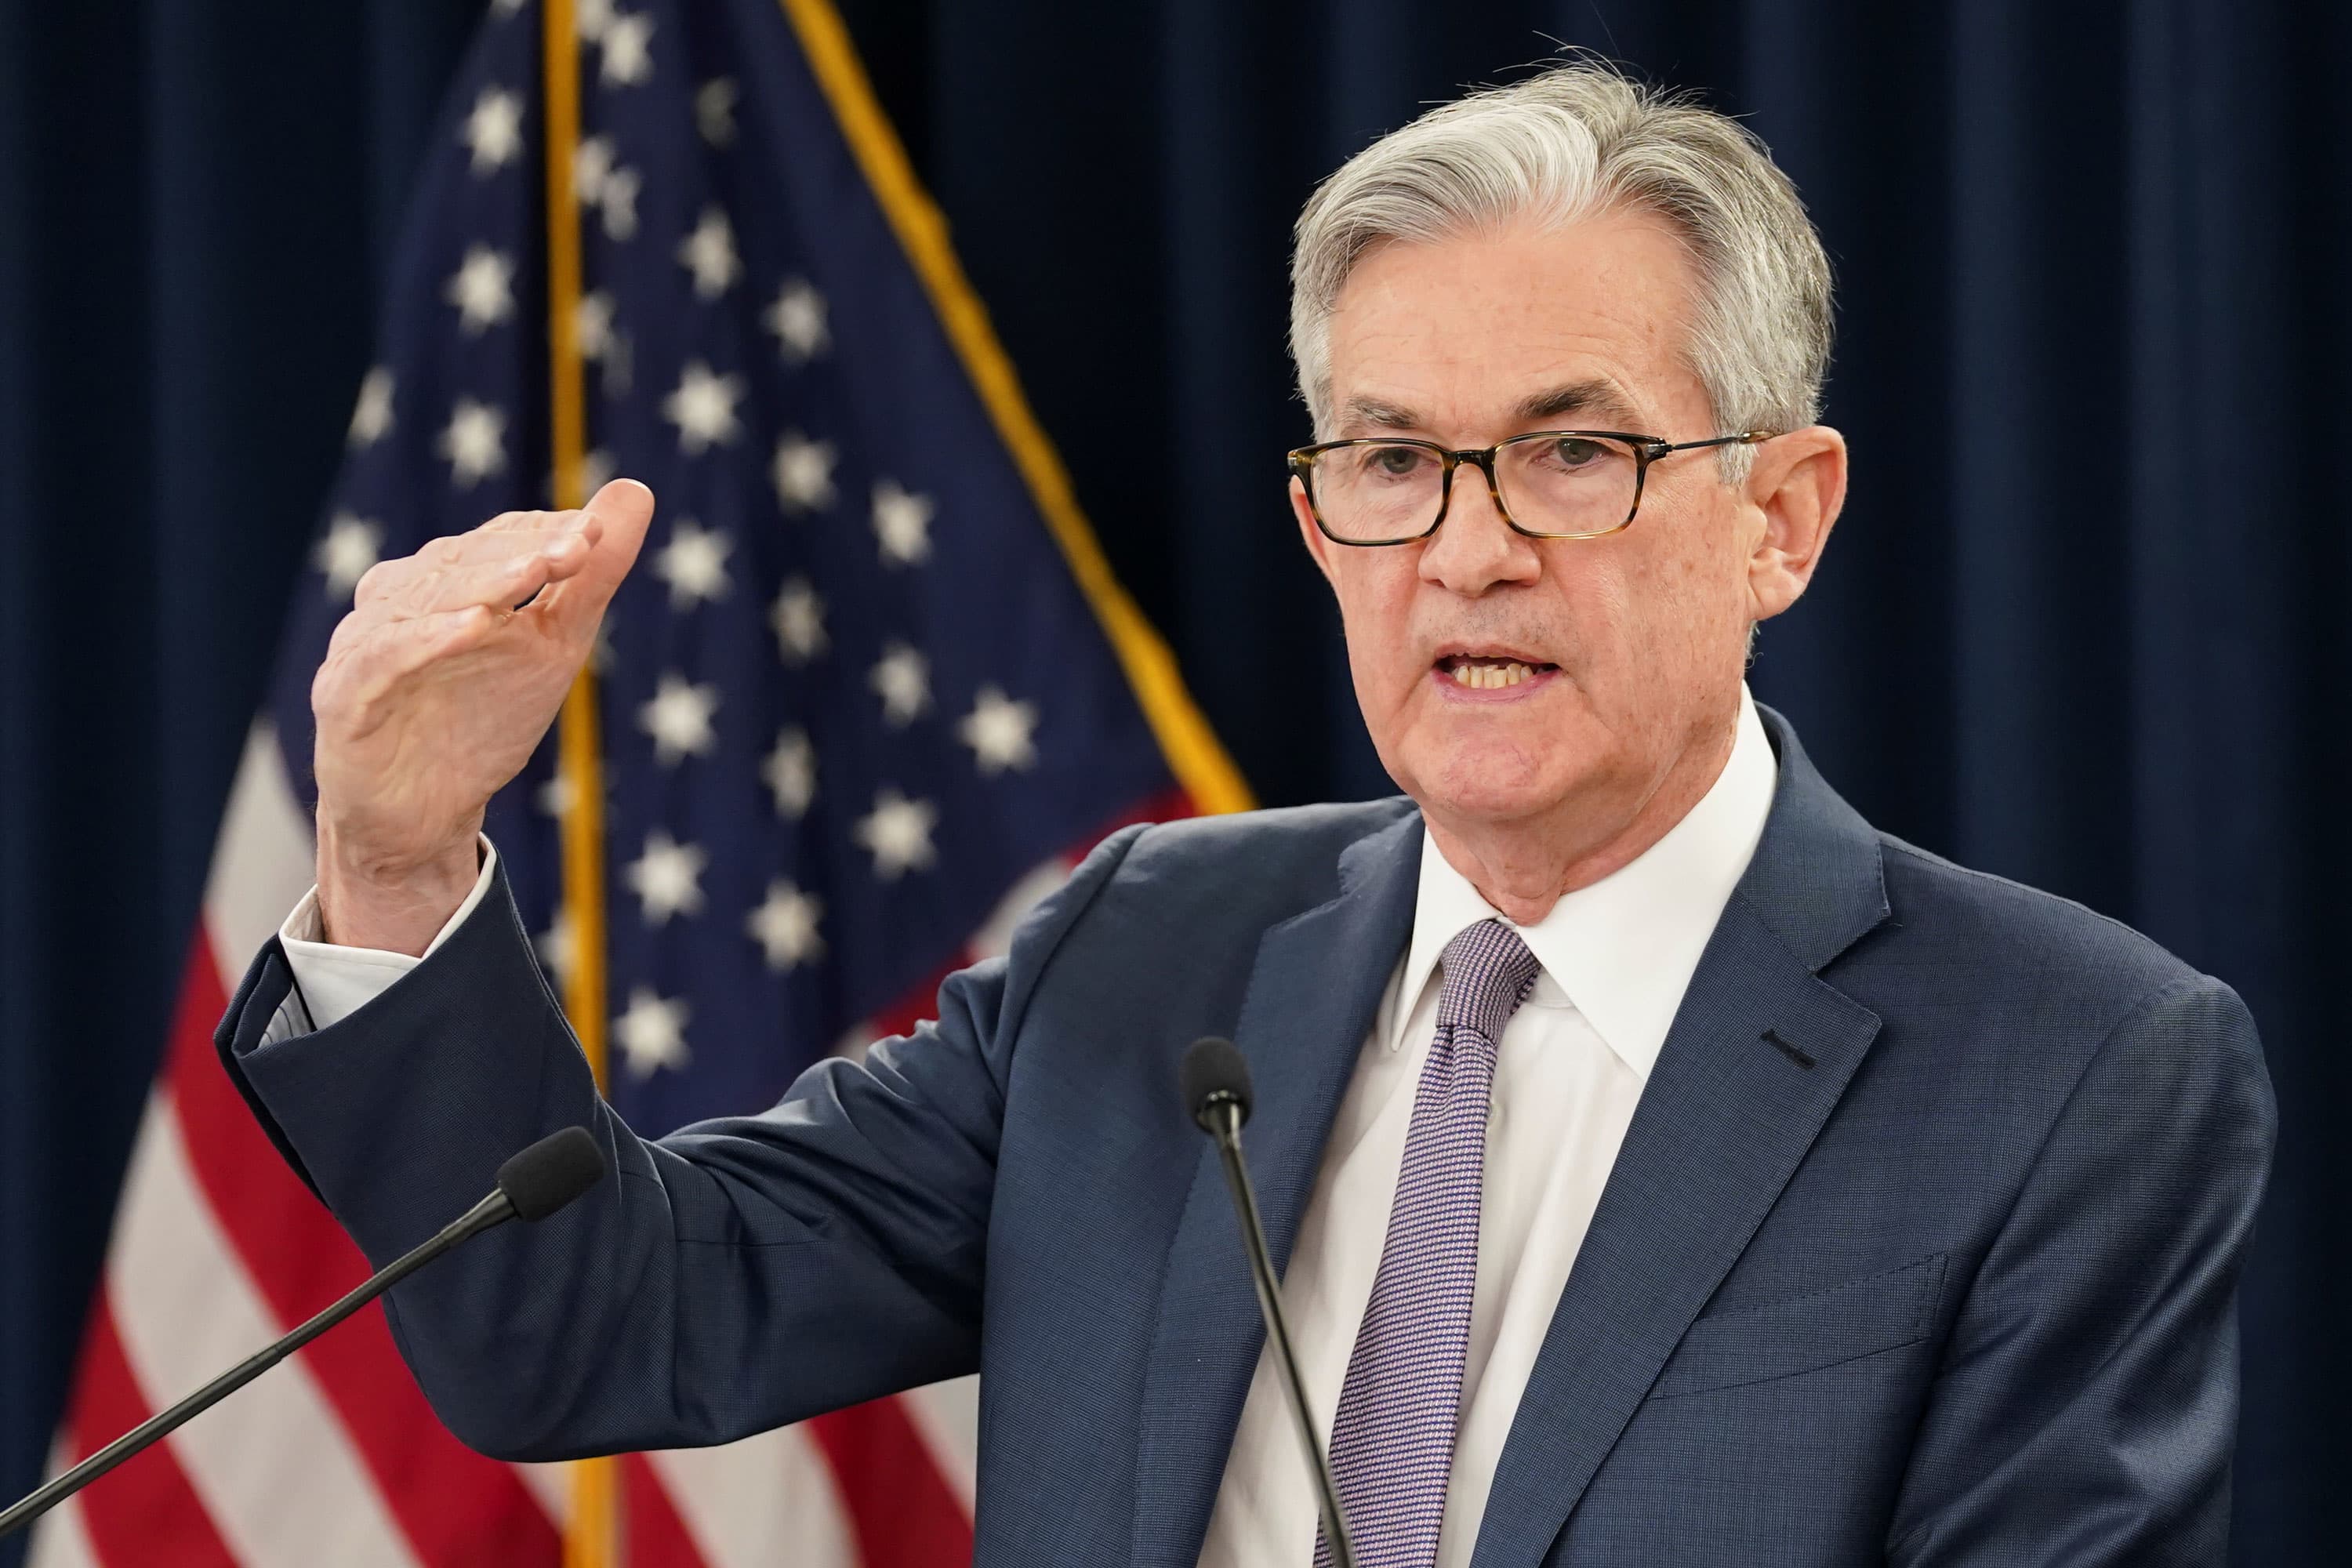 Fed Chair Powell is a ‘conductor’, calming markets and avoiding chaos